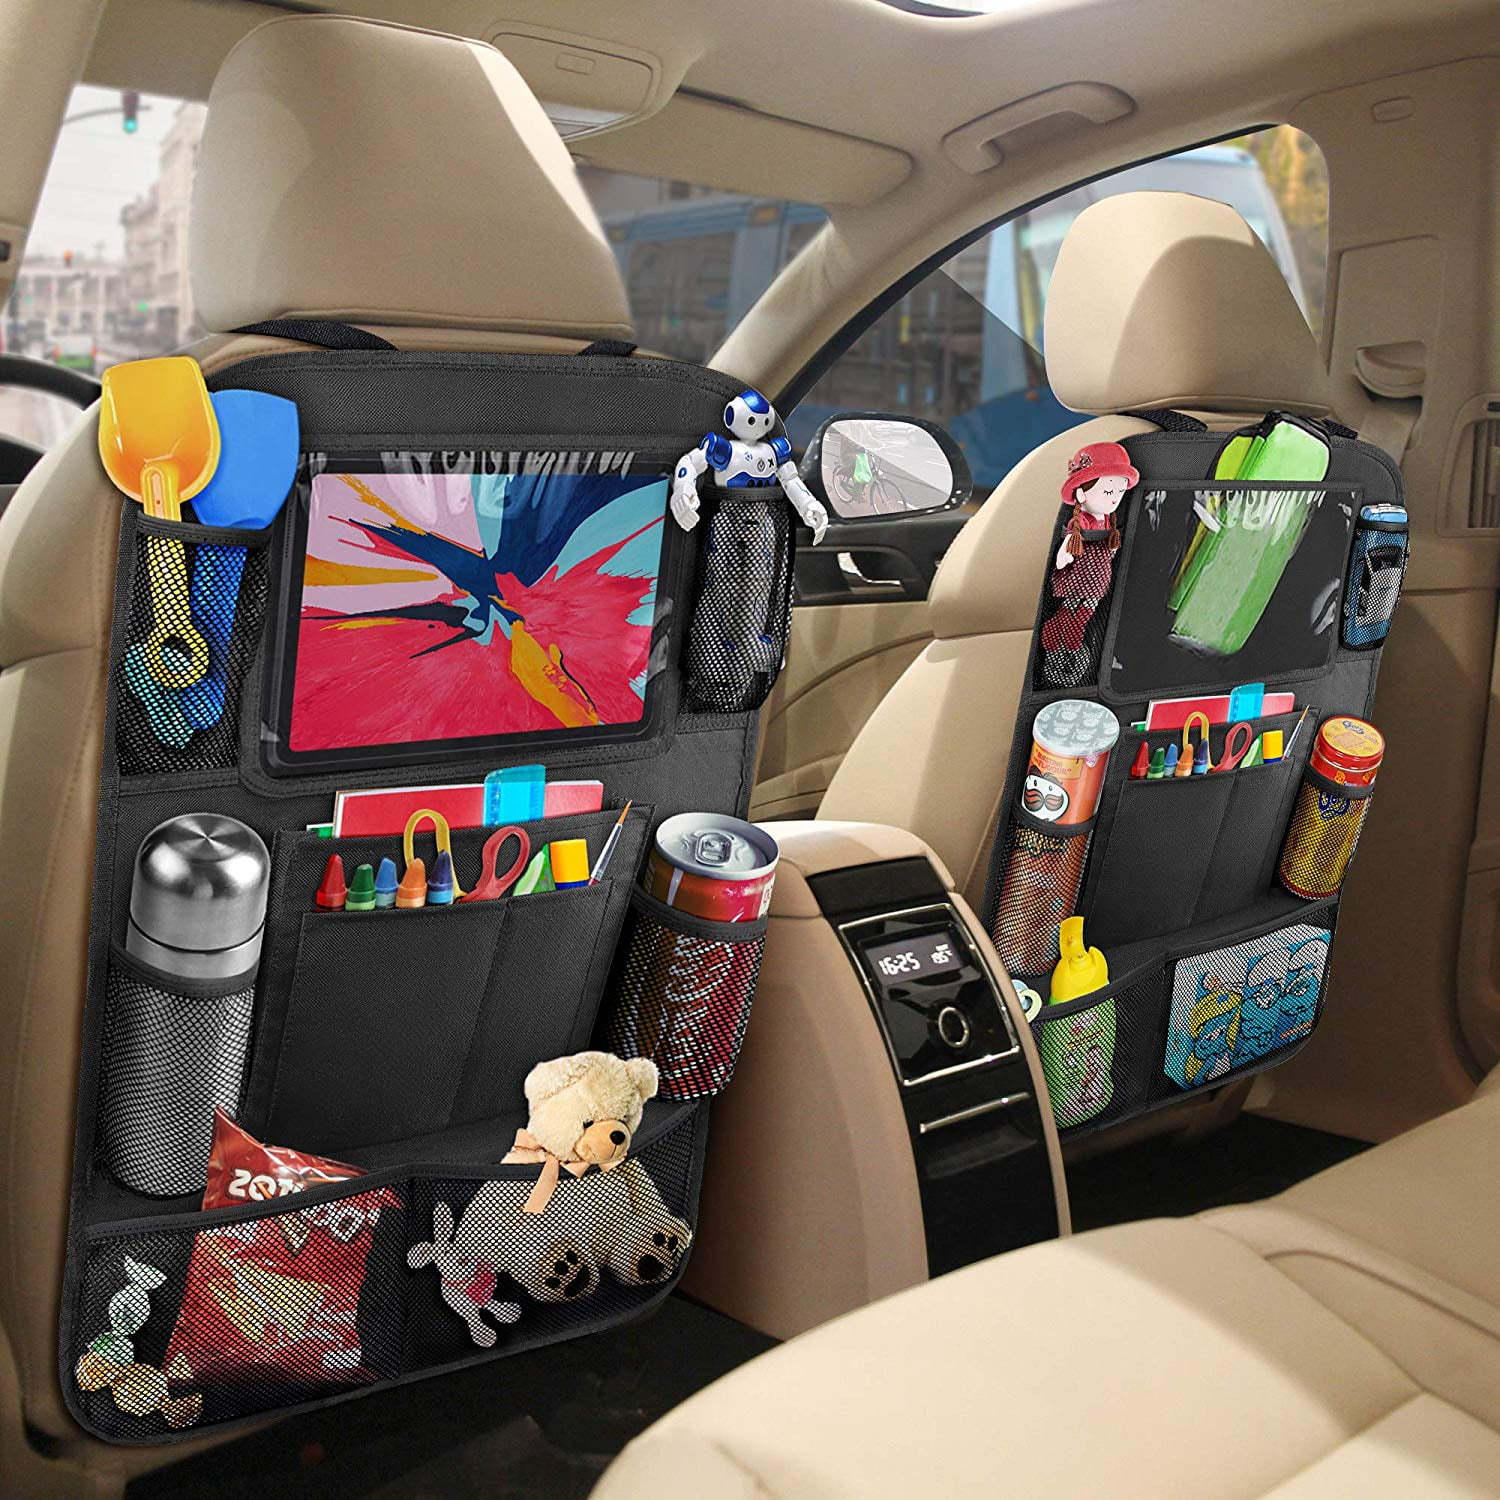 Snacks and other utensils Car Seat Organiser Back Seat & Front Seat Storage Bag with Seat Belt Attachment Cup holders and Foldable Pockets Water Resistant Backseat Organizer for Toys